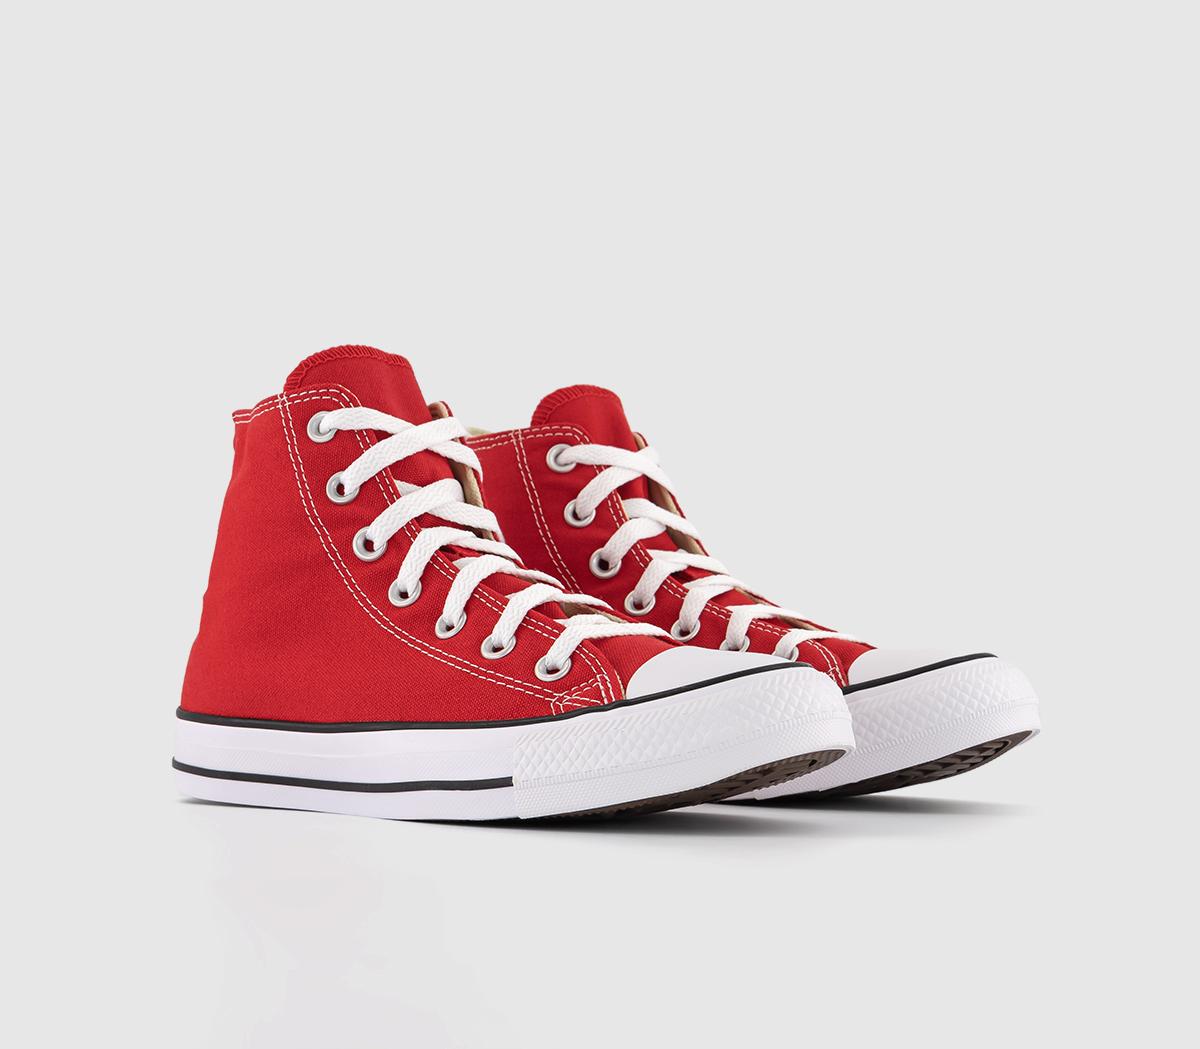 Converse Classic All Star Hi Red Canvas Trainers Red/White, 10